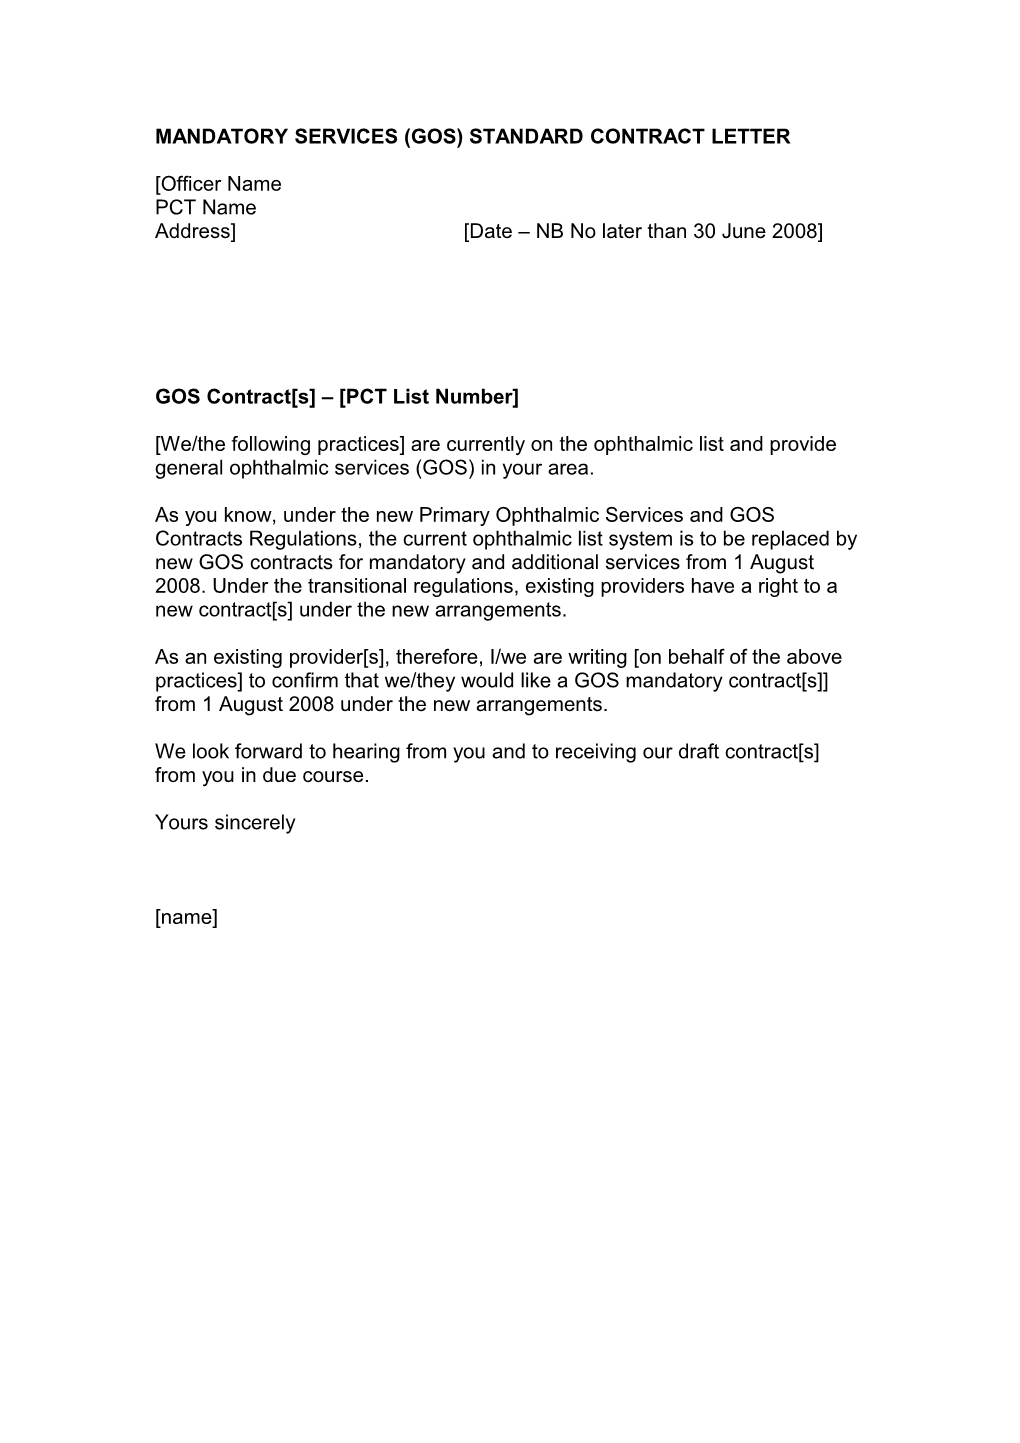 Mandatory Services (Gos) Standard Contract Letter